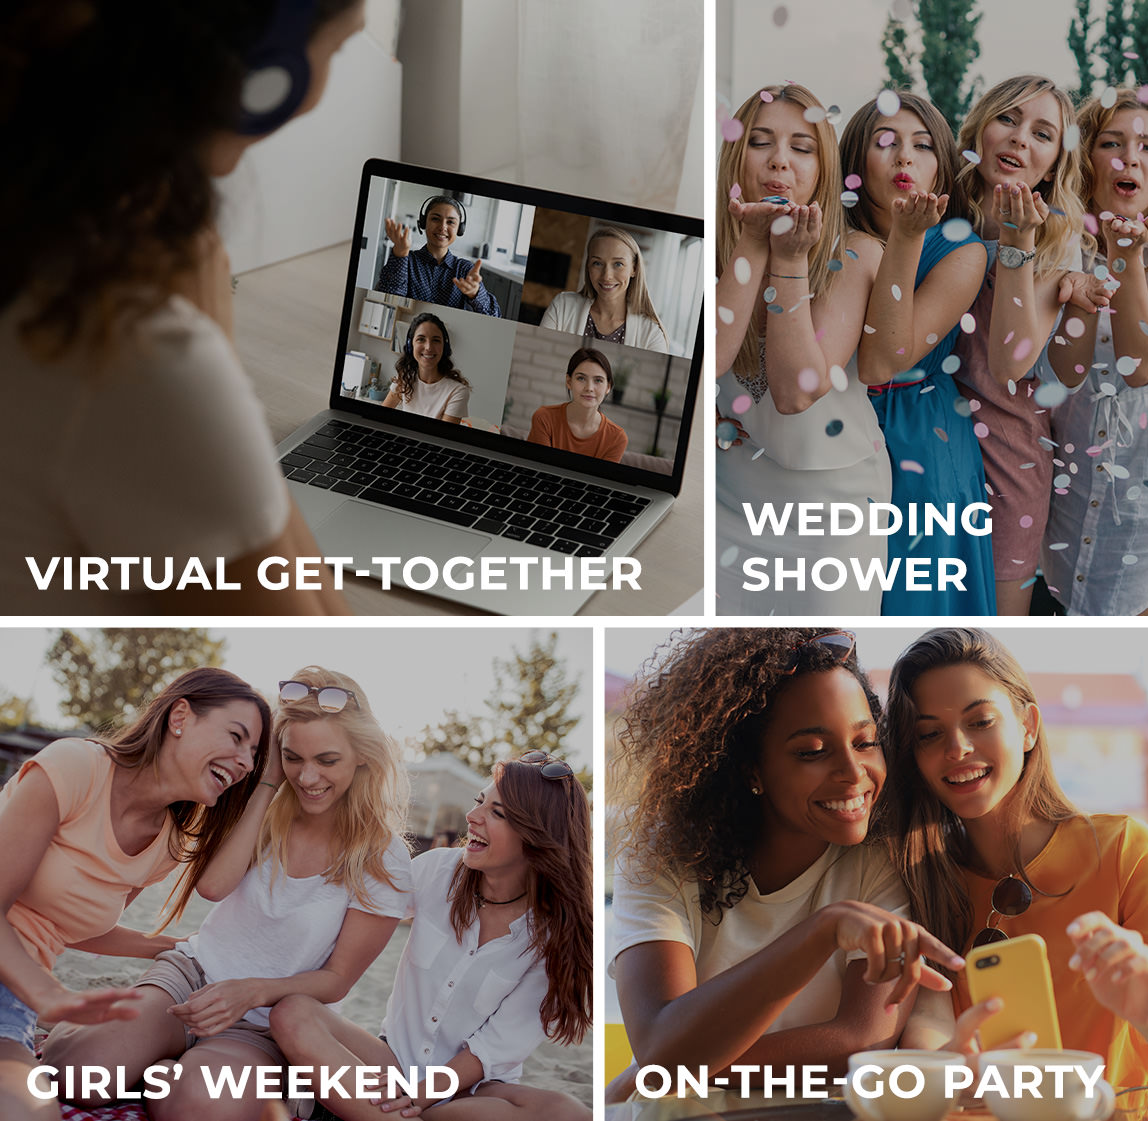 Virtual Get-Together / Wedding Shower / Girls' Weekend / On-The-Go Party